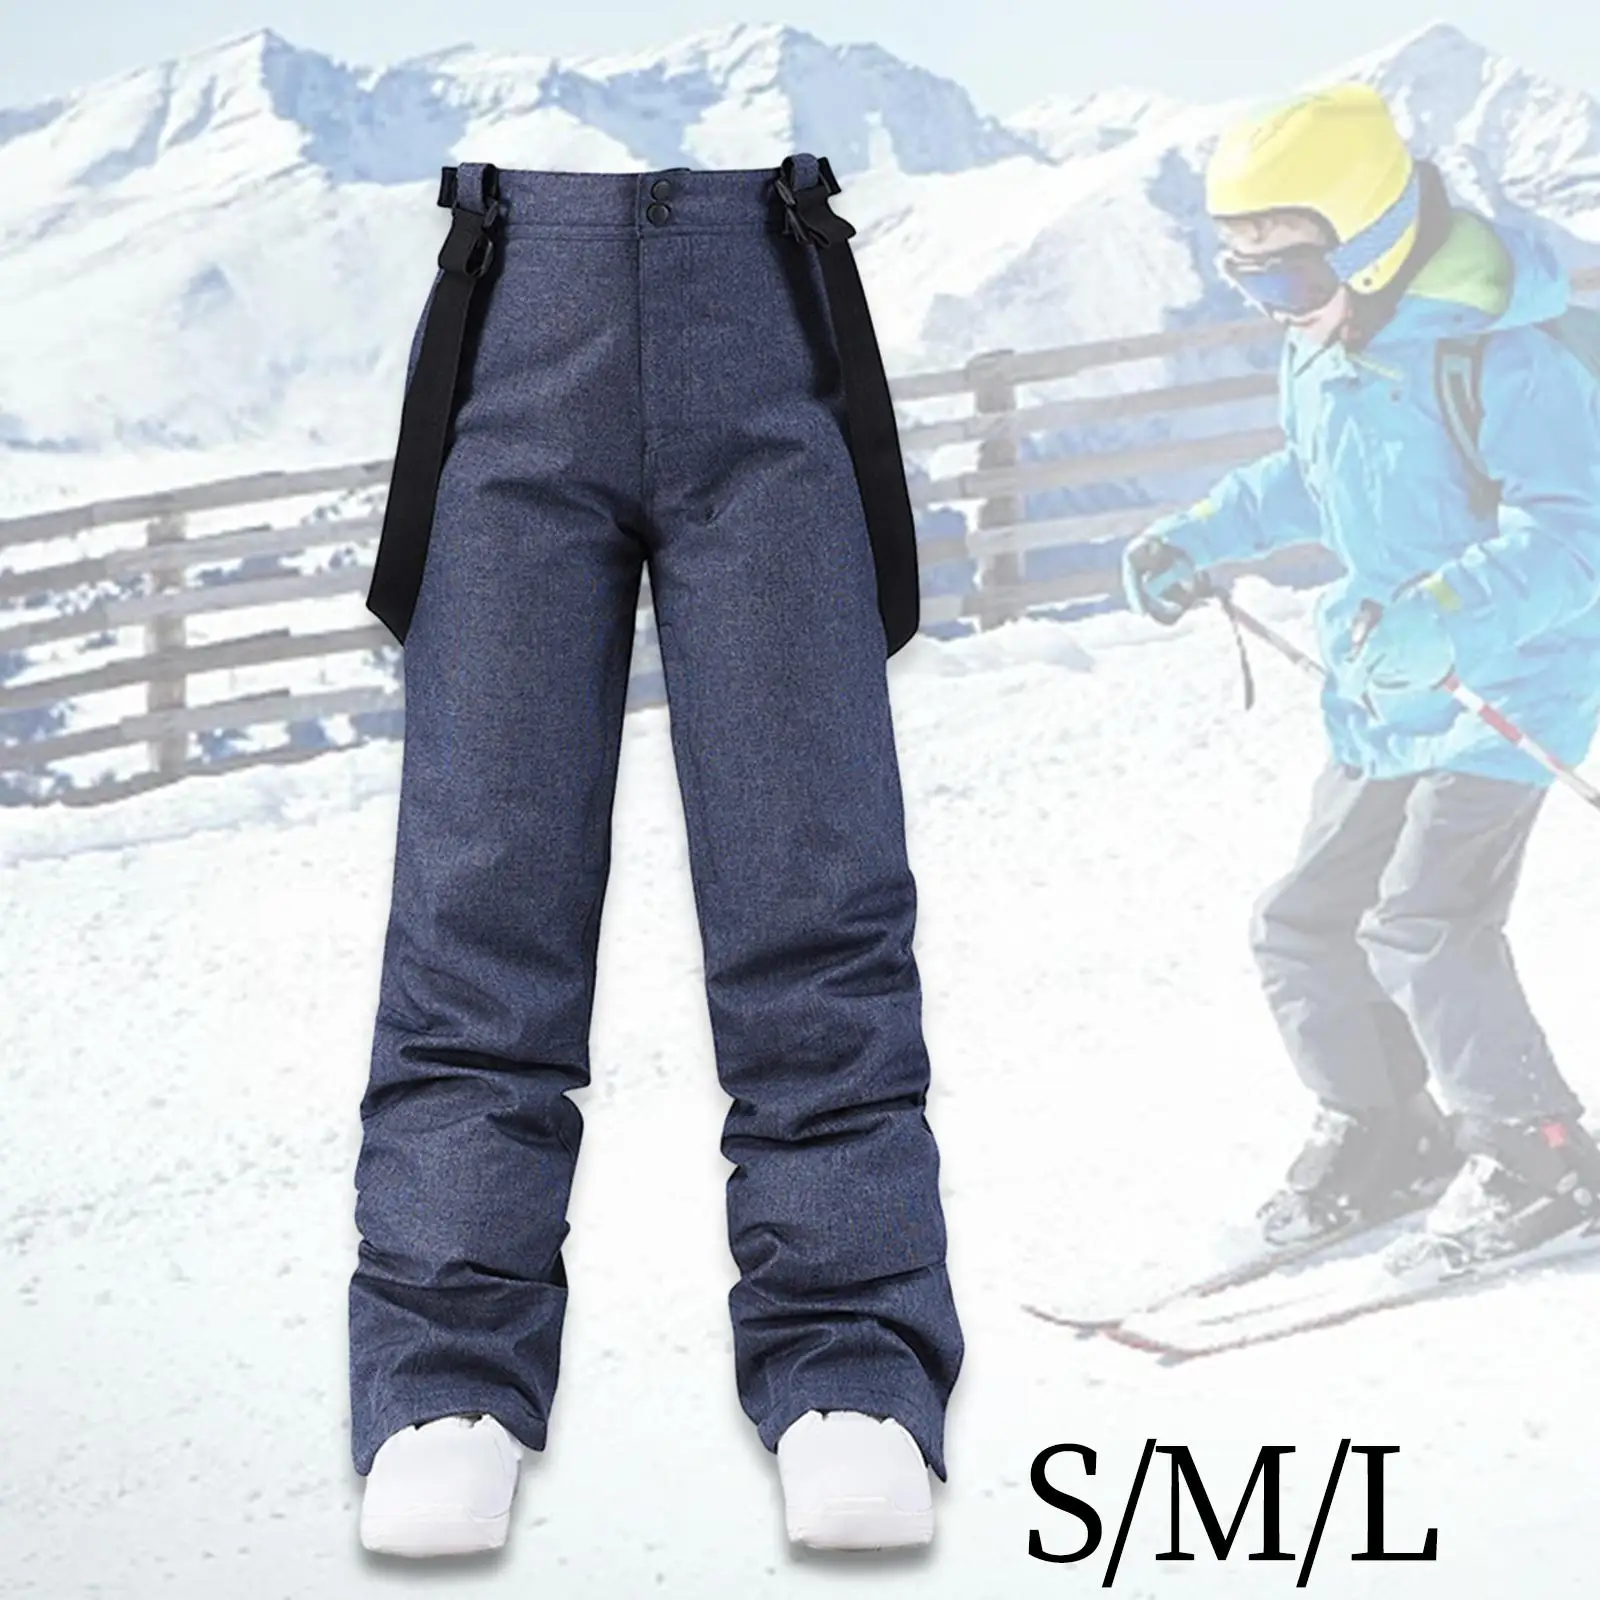 Snow Ski Pants Ski Bib Overalls Skiing Trousers Warm Windproof Insulated Lightweight Snowboard Pants for Fishing, Traveling